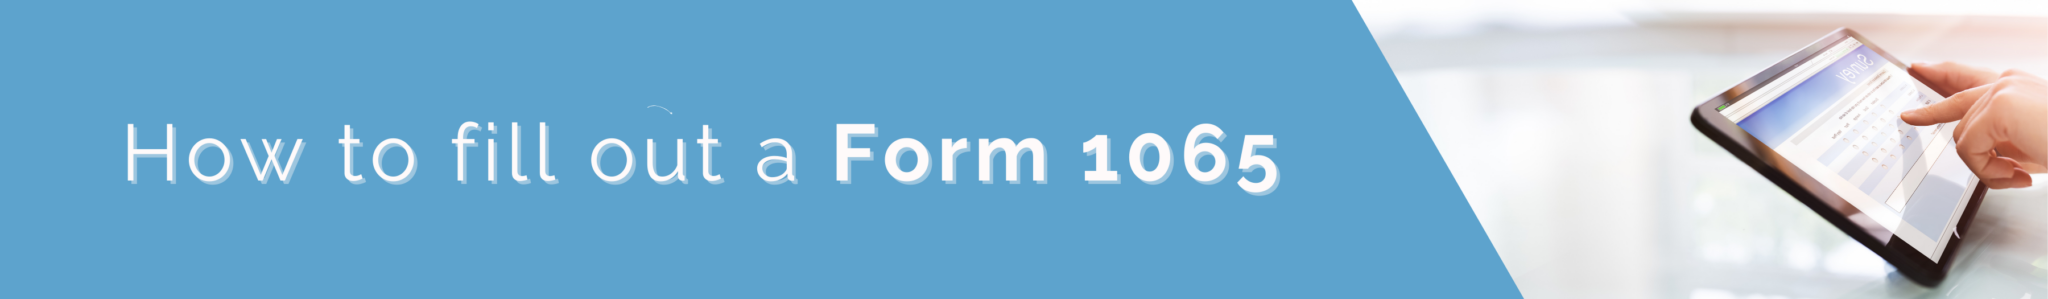 How to fill out a Form 1065